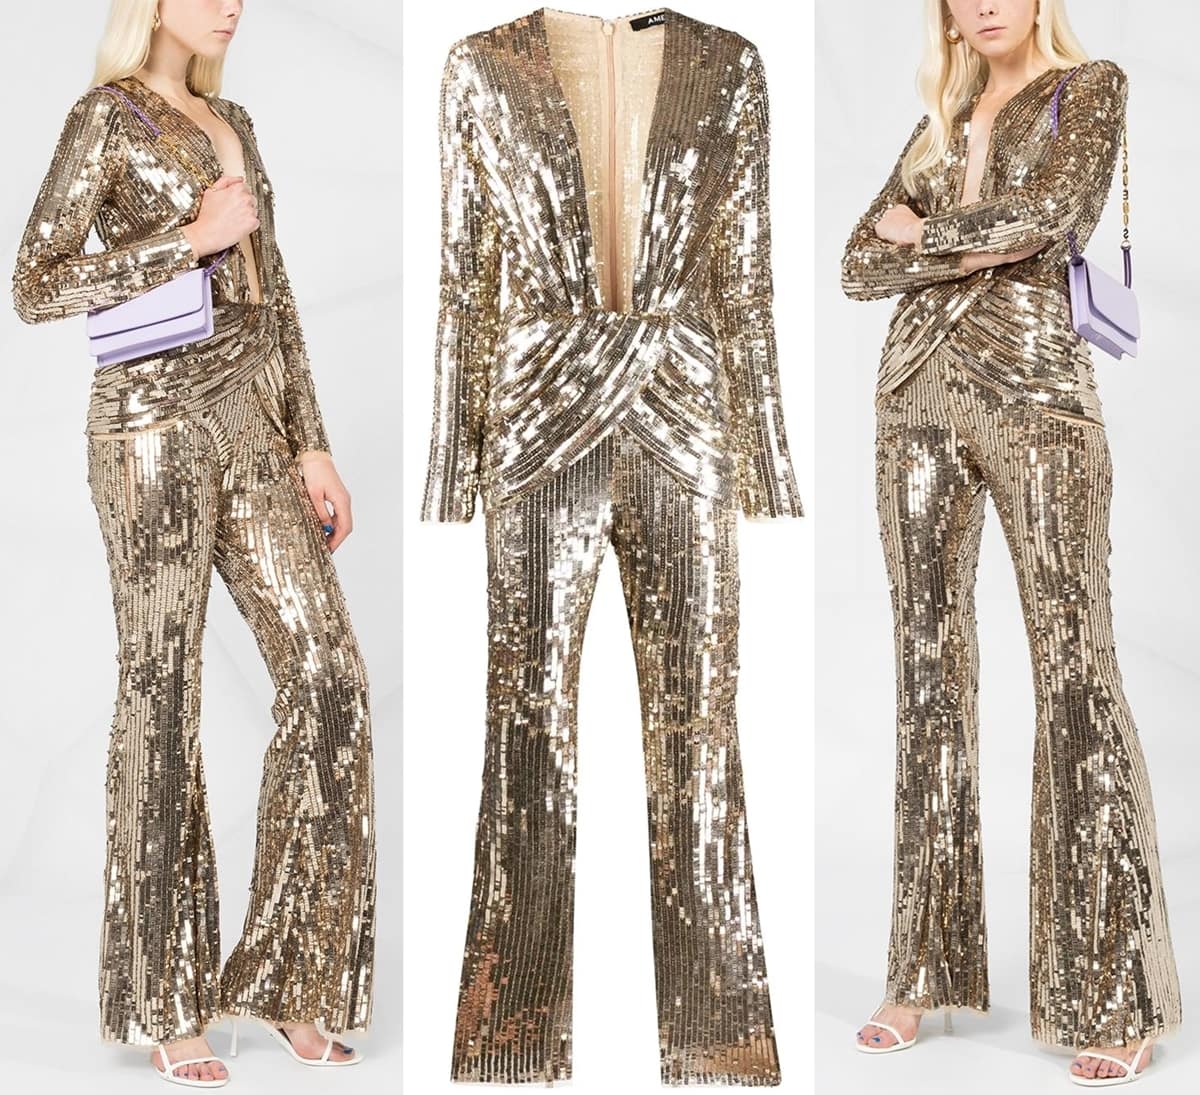 Halle Berry's gold-tone jumpsuit from Amen featuring a plunge style, a v-neck, long sleeves, a wide leg, a wraparound draped style at the mid-section, and all-over embellishment